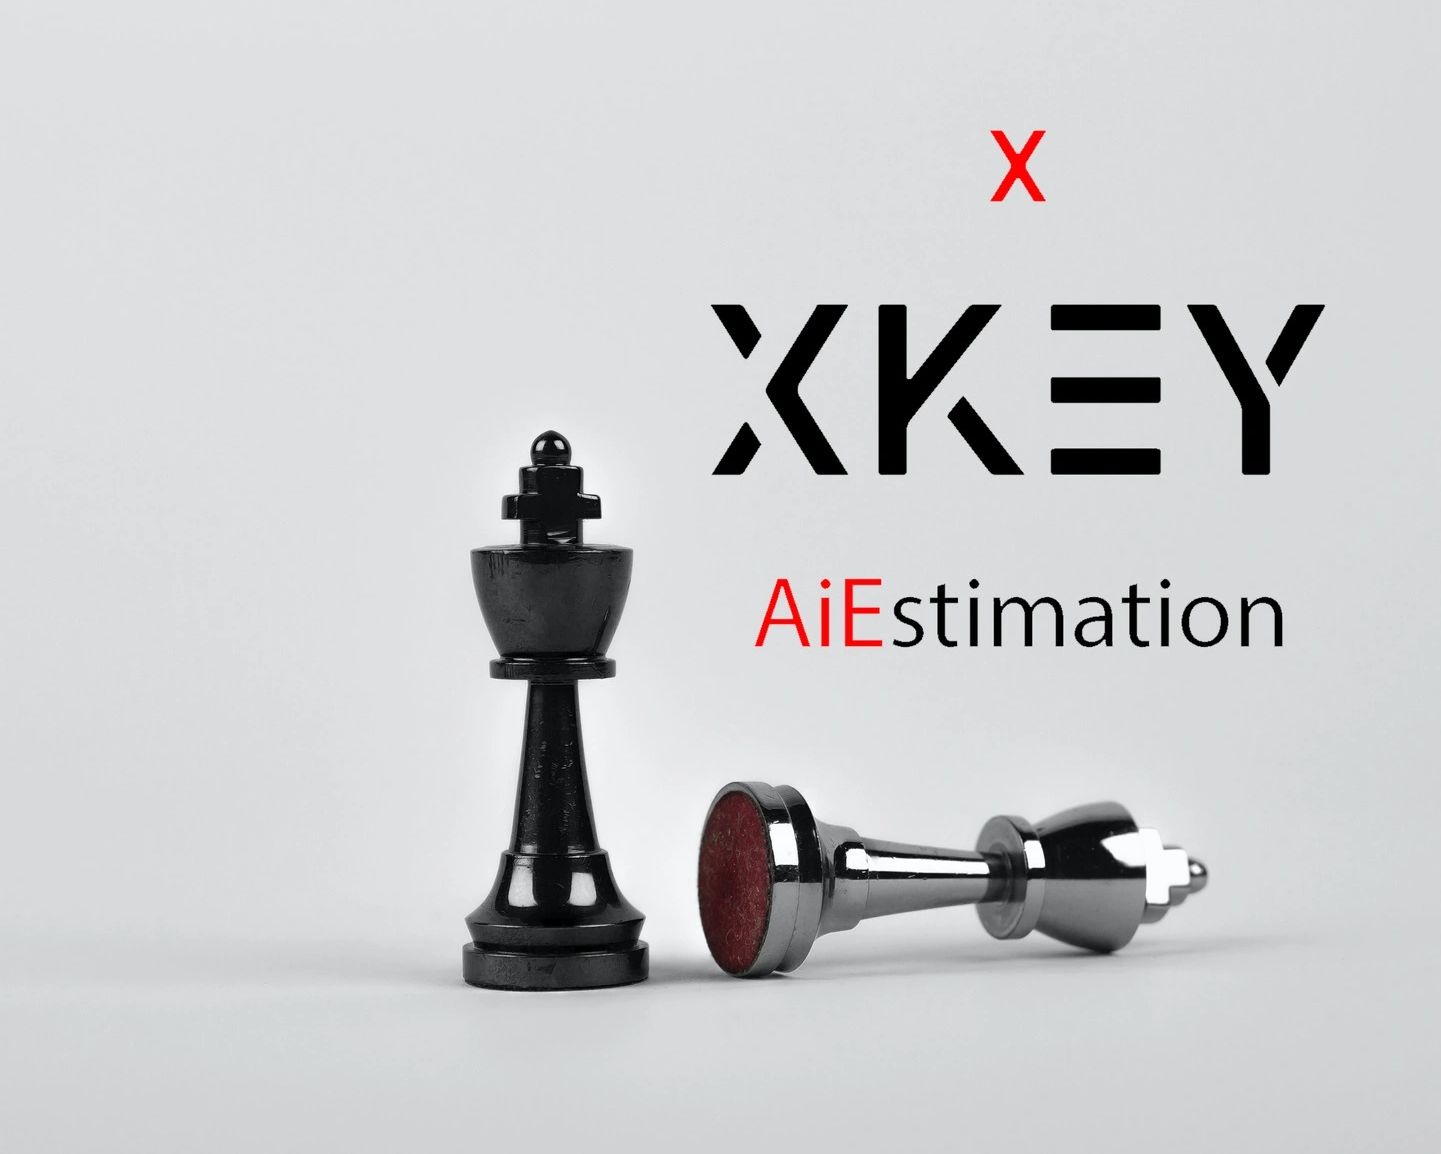 Xkey AiEstimation "Checkmate "Chess game image